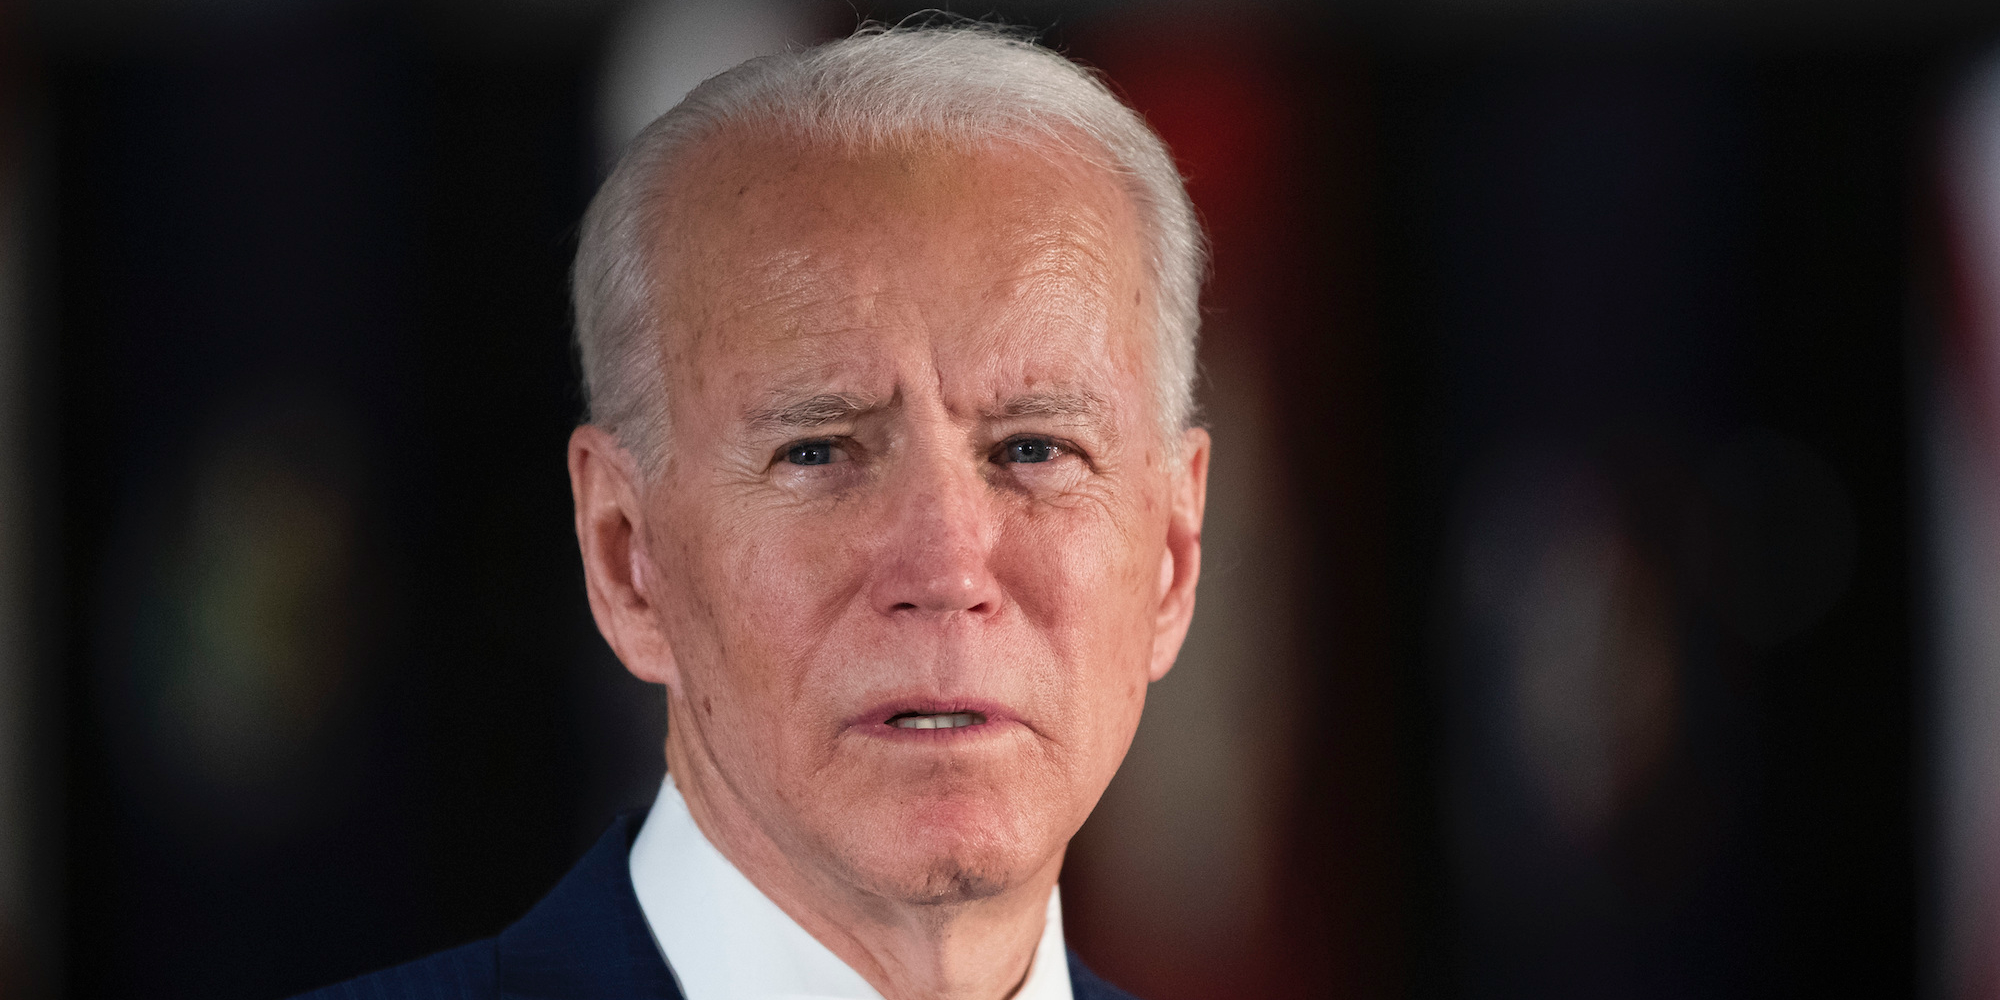 Joe Biden calls for a ‘swift, full, and transparent investigation’ of the killing of Ahmaud Arbery after footage of the incident emerges